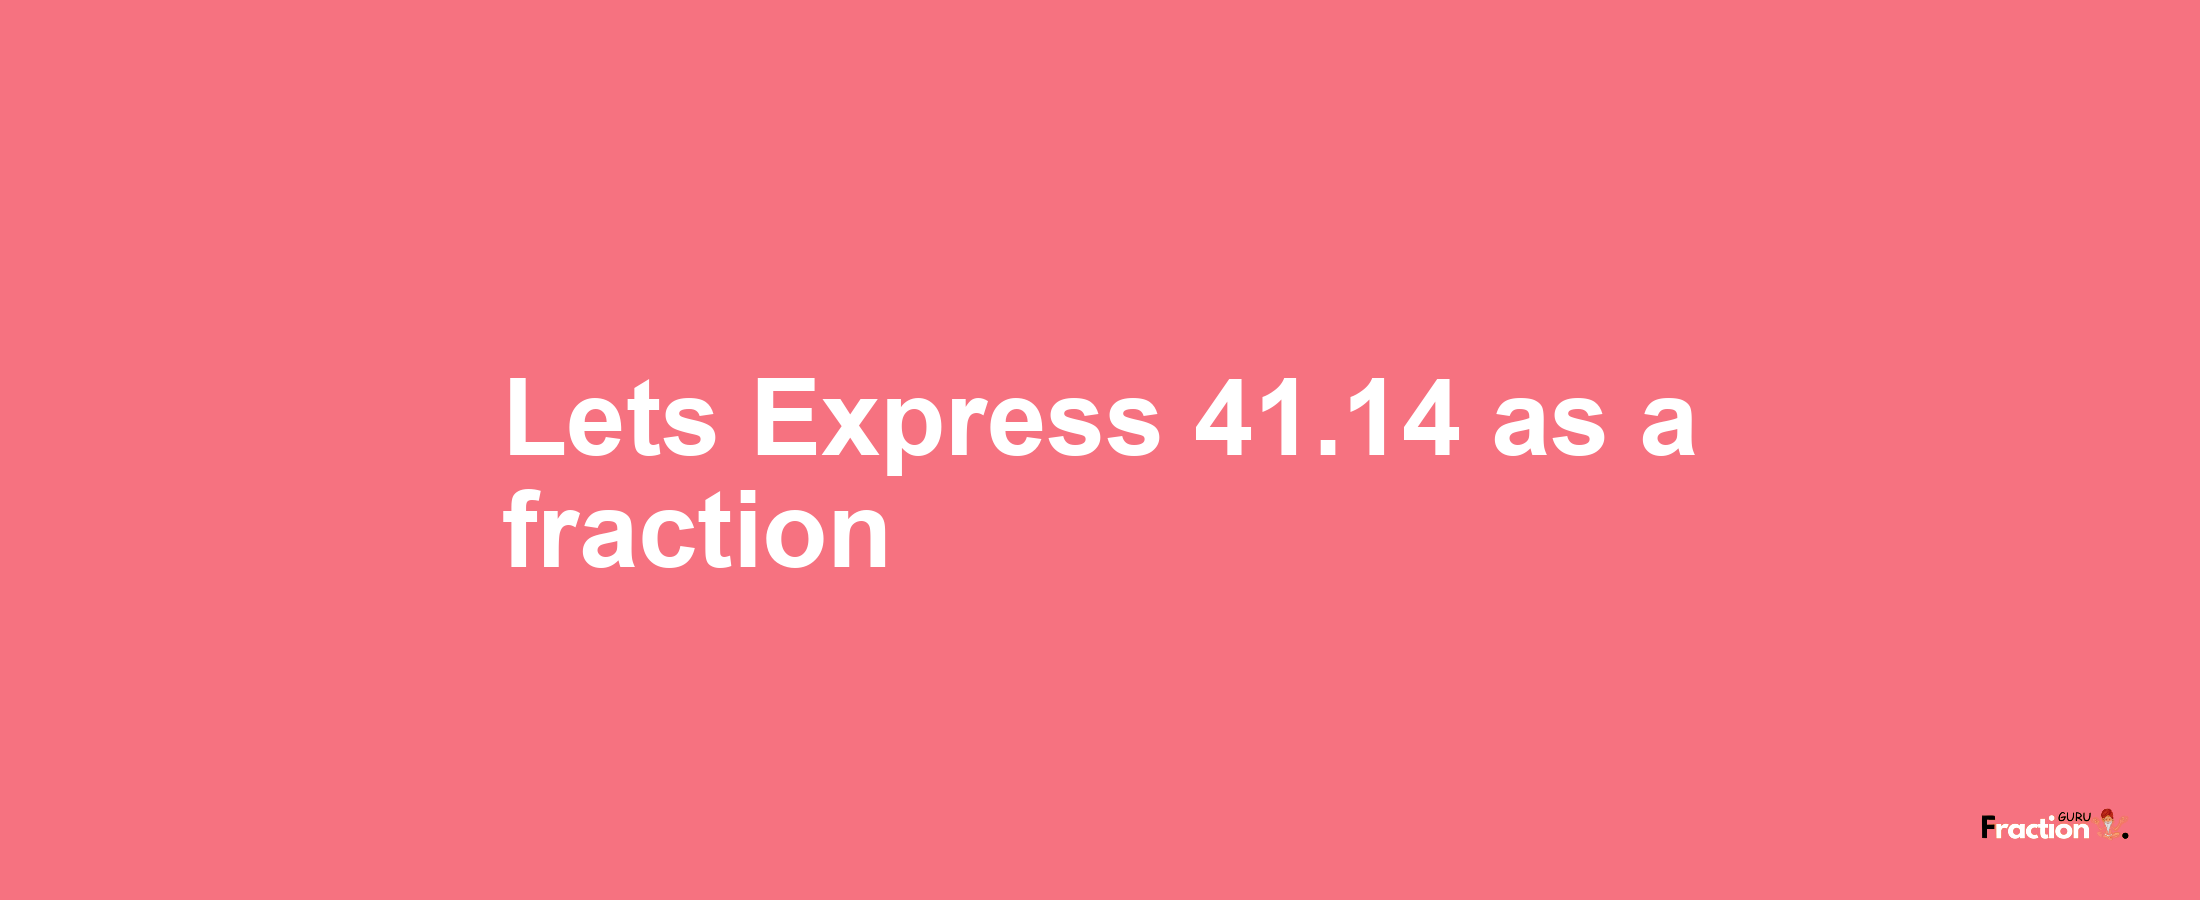 Lets Express 41.14 as afraction